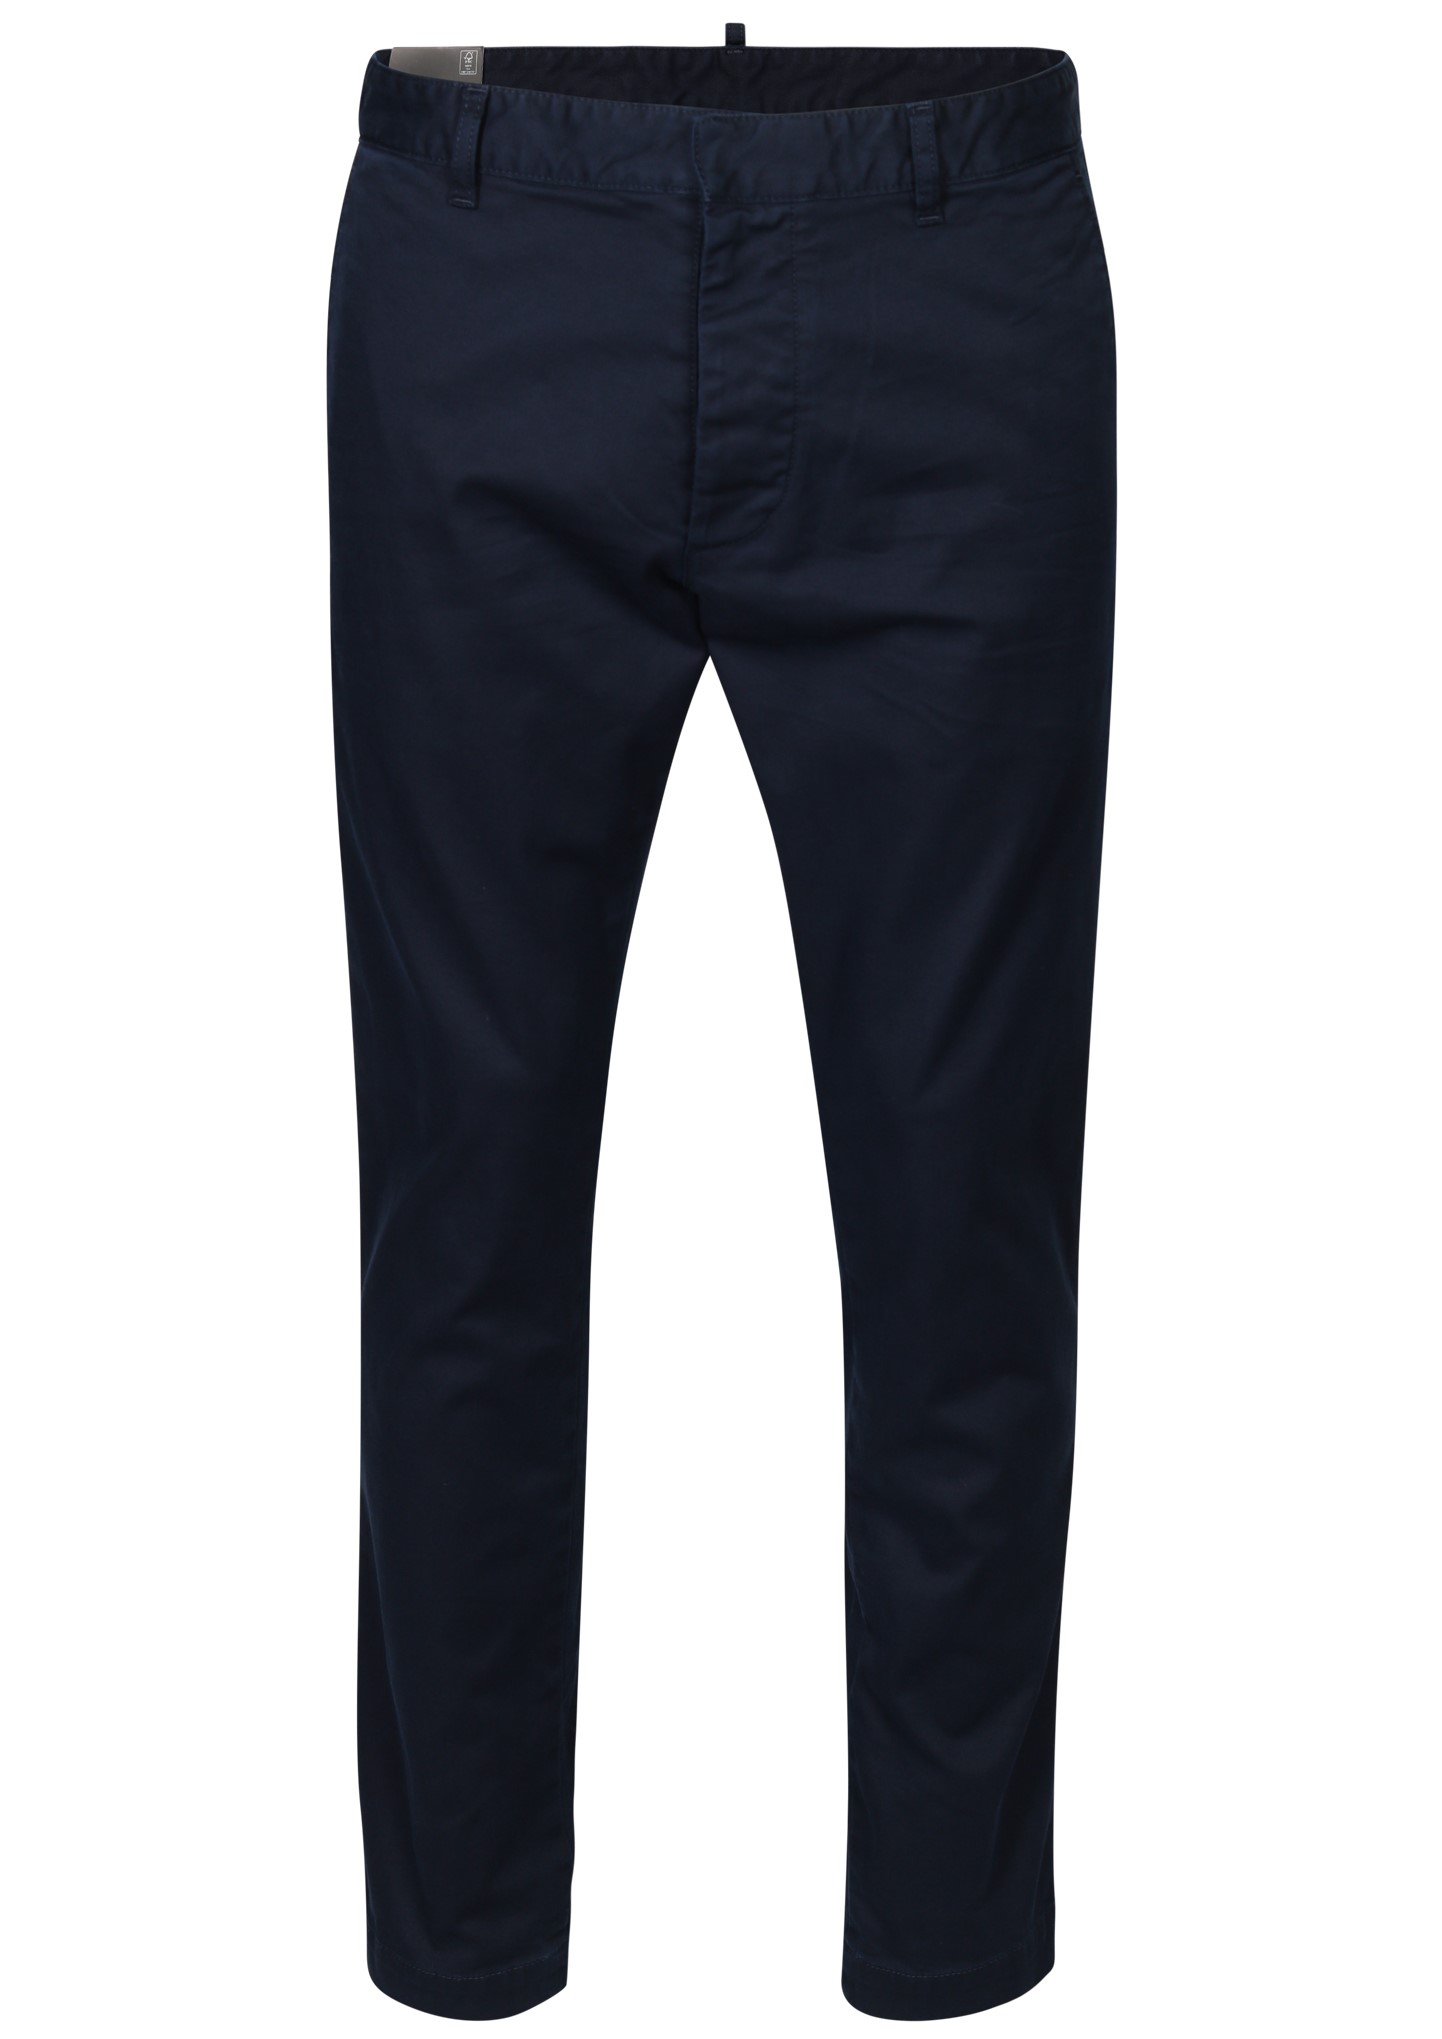 DSQUARED2 Cool Guy Chino Pant in Navy